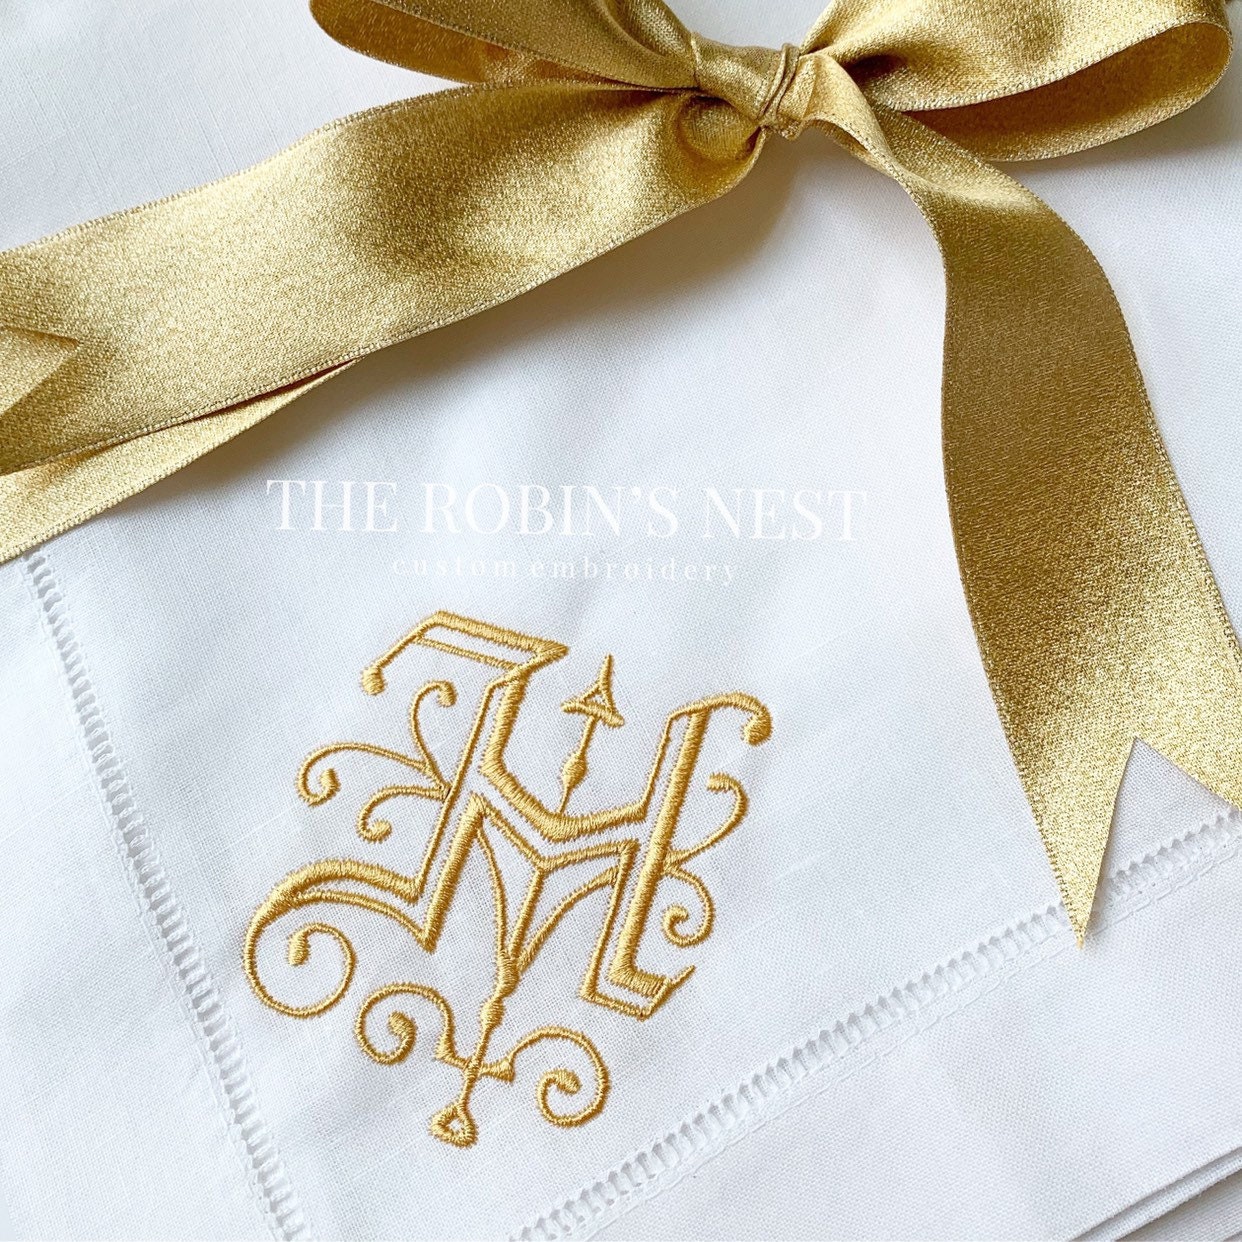 Vintage Linen Elaborate Gold Embroidery Dinner Napkins, Set of 8 - Things  Most Delightful